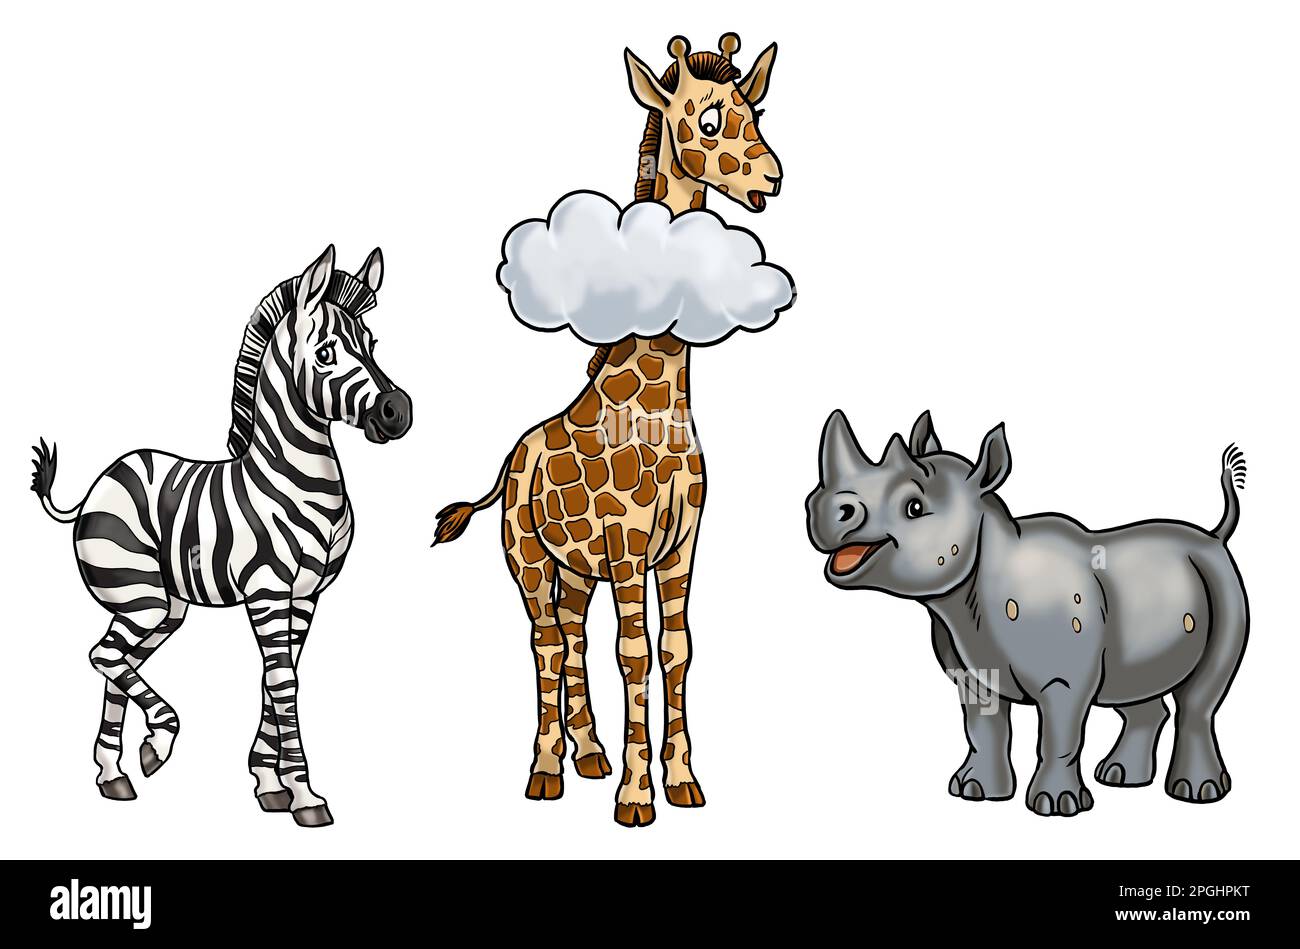 Cute rhinoceros, giraffe and zebra illustration. Isolated template with funny and happy animals. Coloring page for kids. Stock Photo